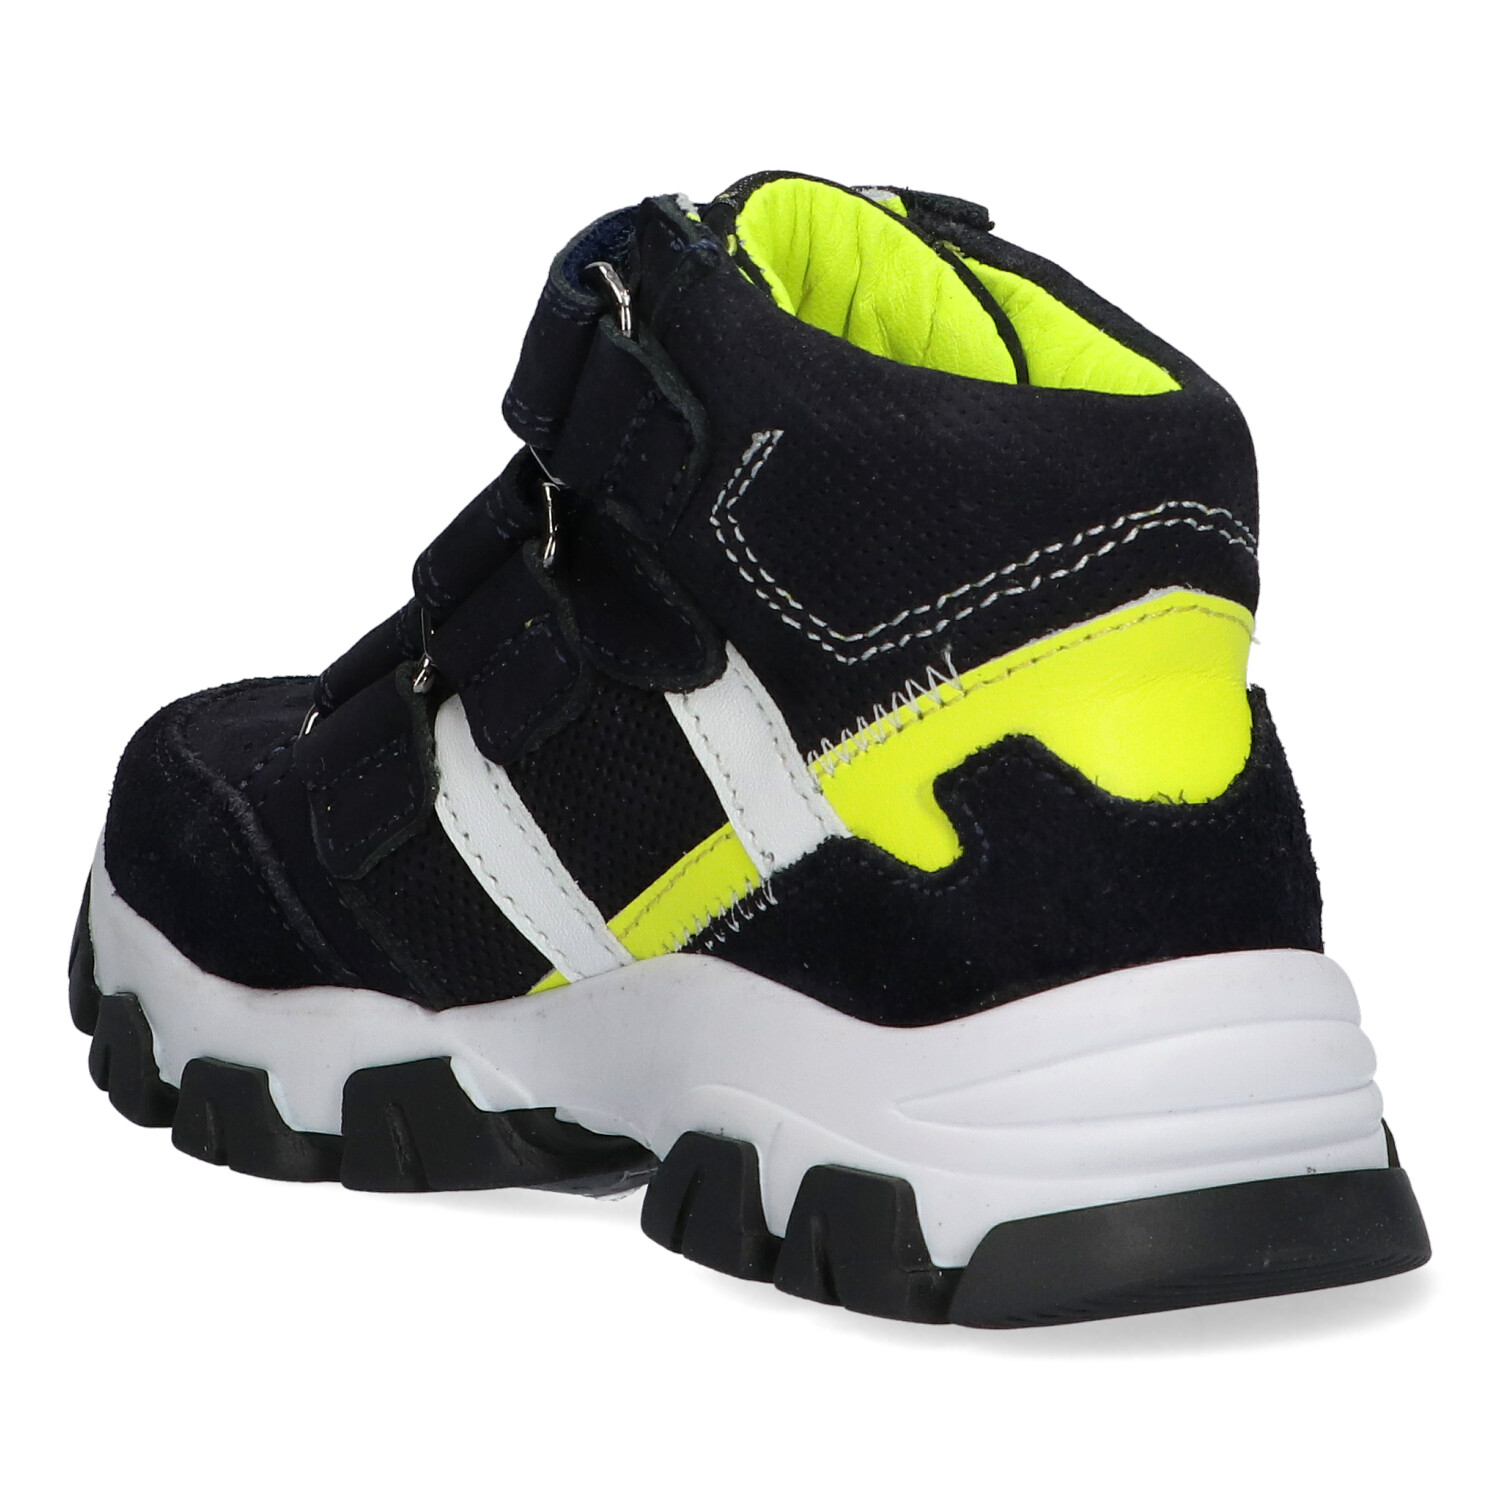 Trackstyle 322821 Boot Arend Athena Dark Blue 5